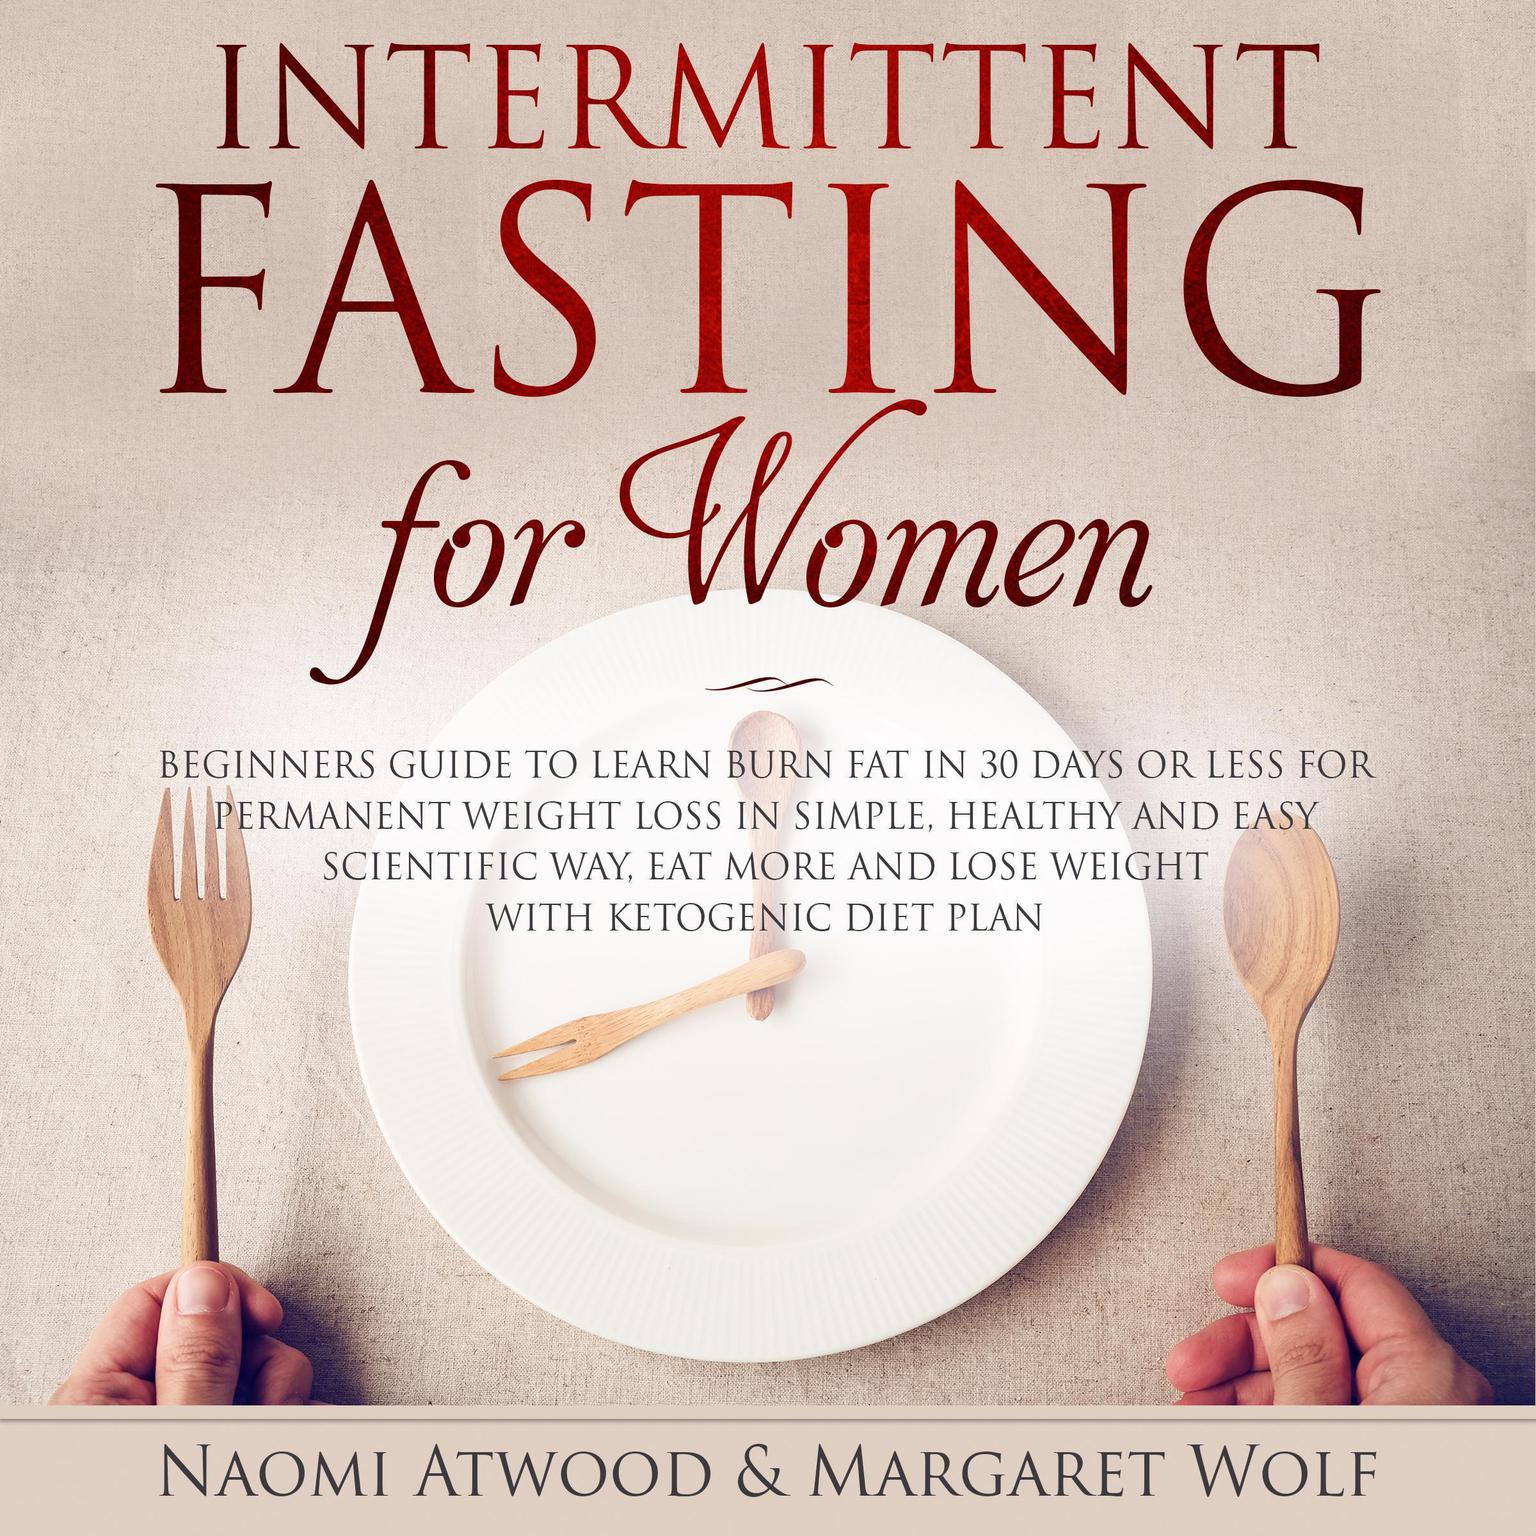 Intermittent Fasting for Women: Beginners Guide to Learn Burn Fat in 30 Days or less for Permanent Weight Loss in Simple, Healthy and Easy Scientific Way, Eat More and Lose Weight With Ketogenic Diet Audiobook, by Margaret Wolf